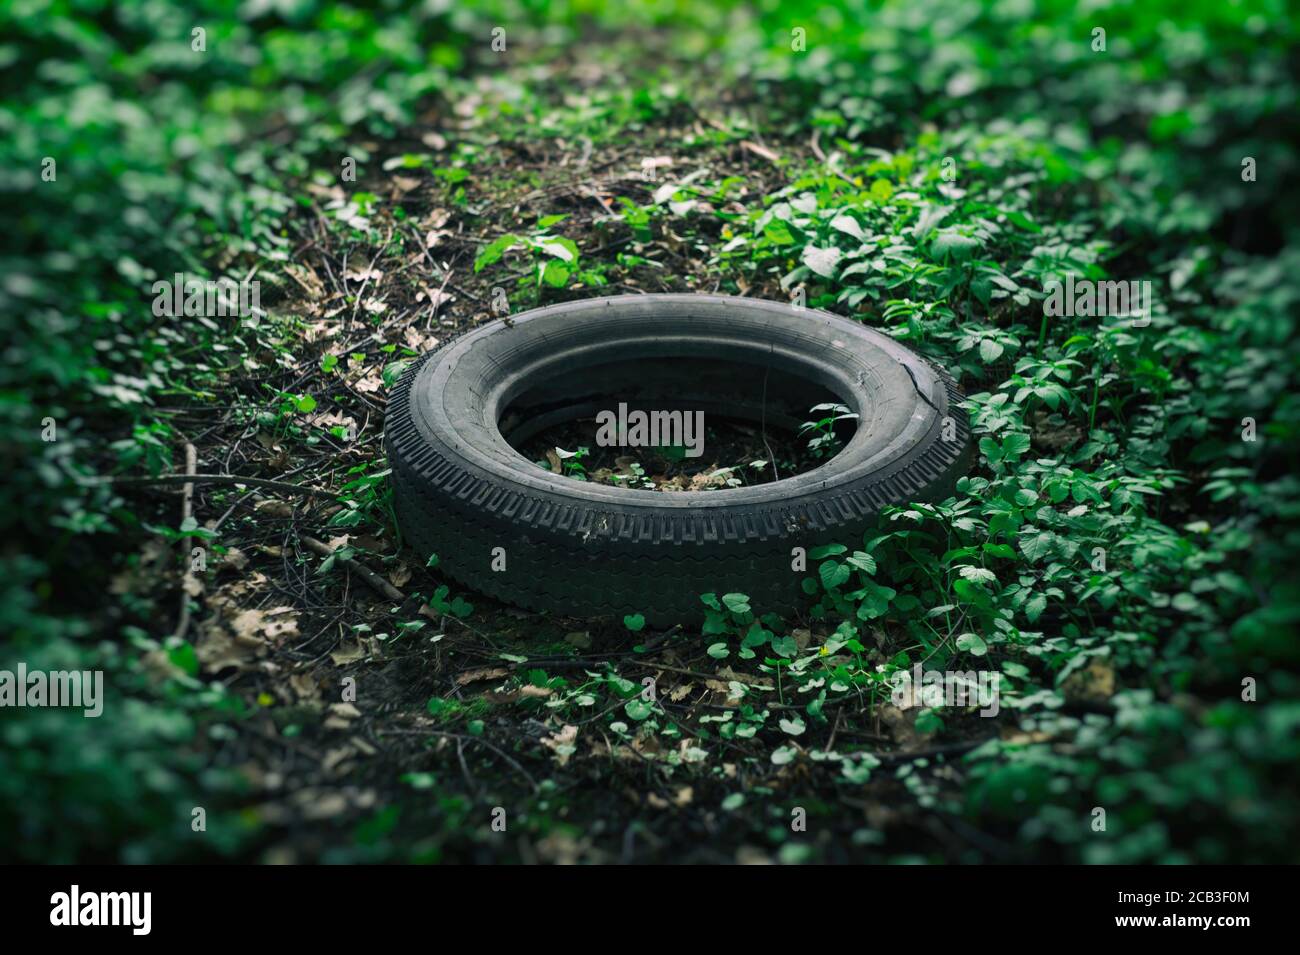 Illegal dumping in the nature. Old tire / tyre is tipped on the grass in the nature. Ecological problem of discarding waste on illegal place and spot Stock Photo